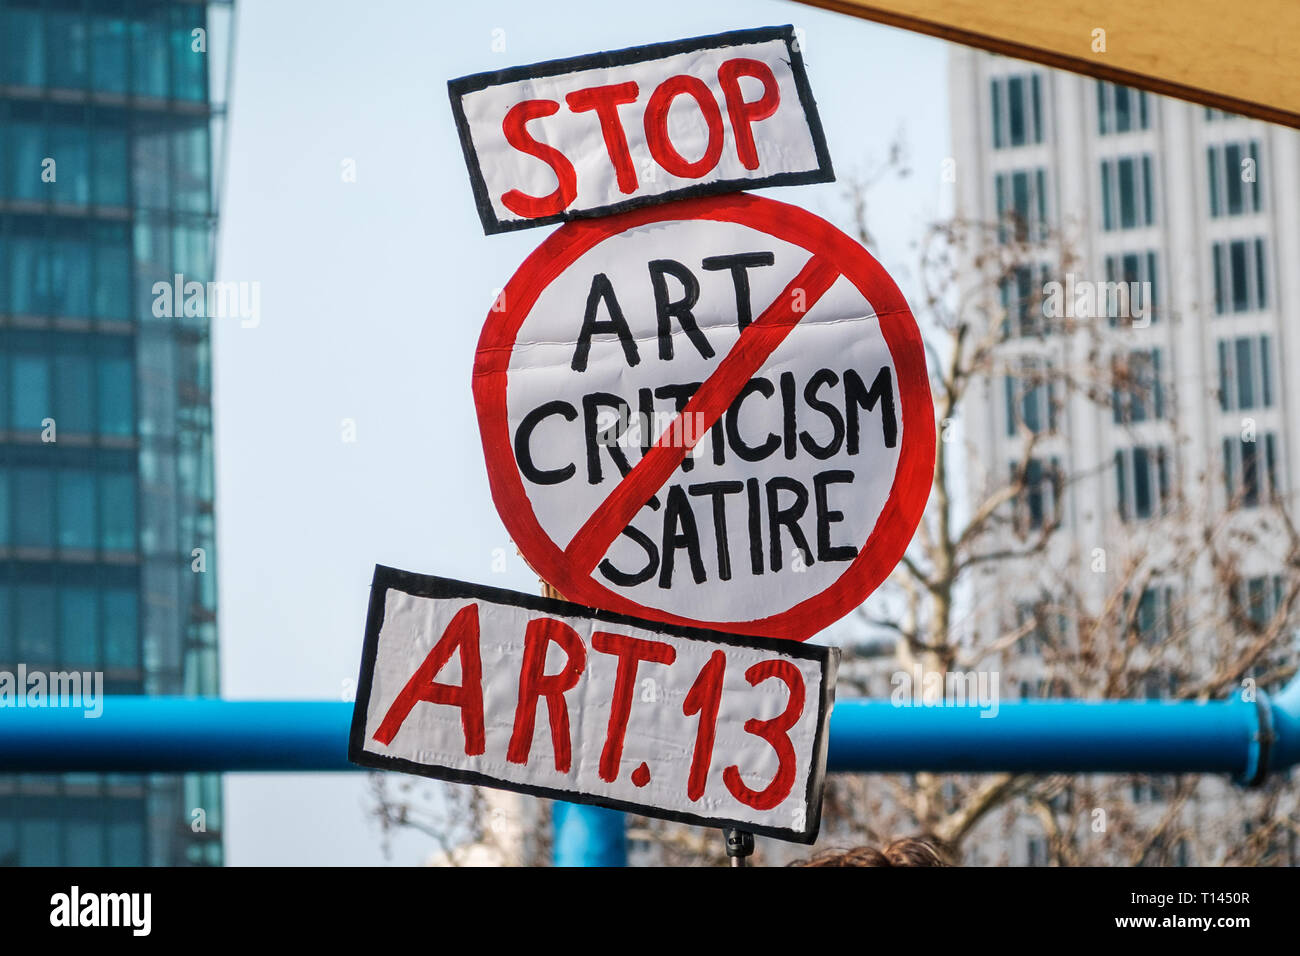 Berlin, Germany. 23rd March, 2019: Demonstration against EU copyright reform /article 11 and article 13 in Berlin Germany. Credit: hanohiki/Alamy Live News Stock Photo